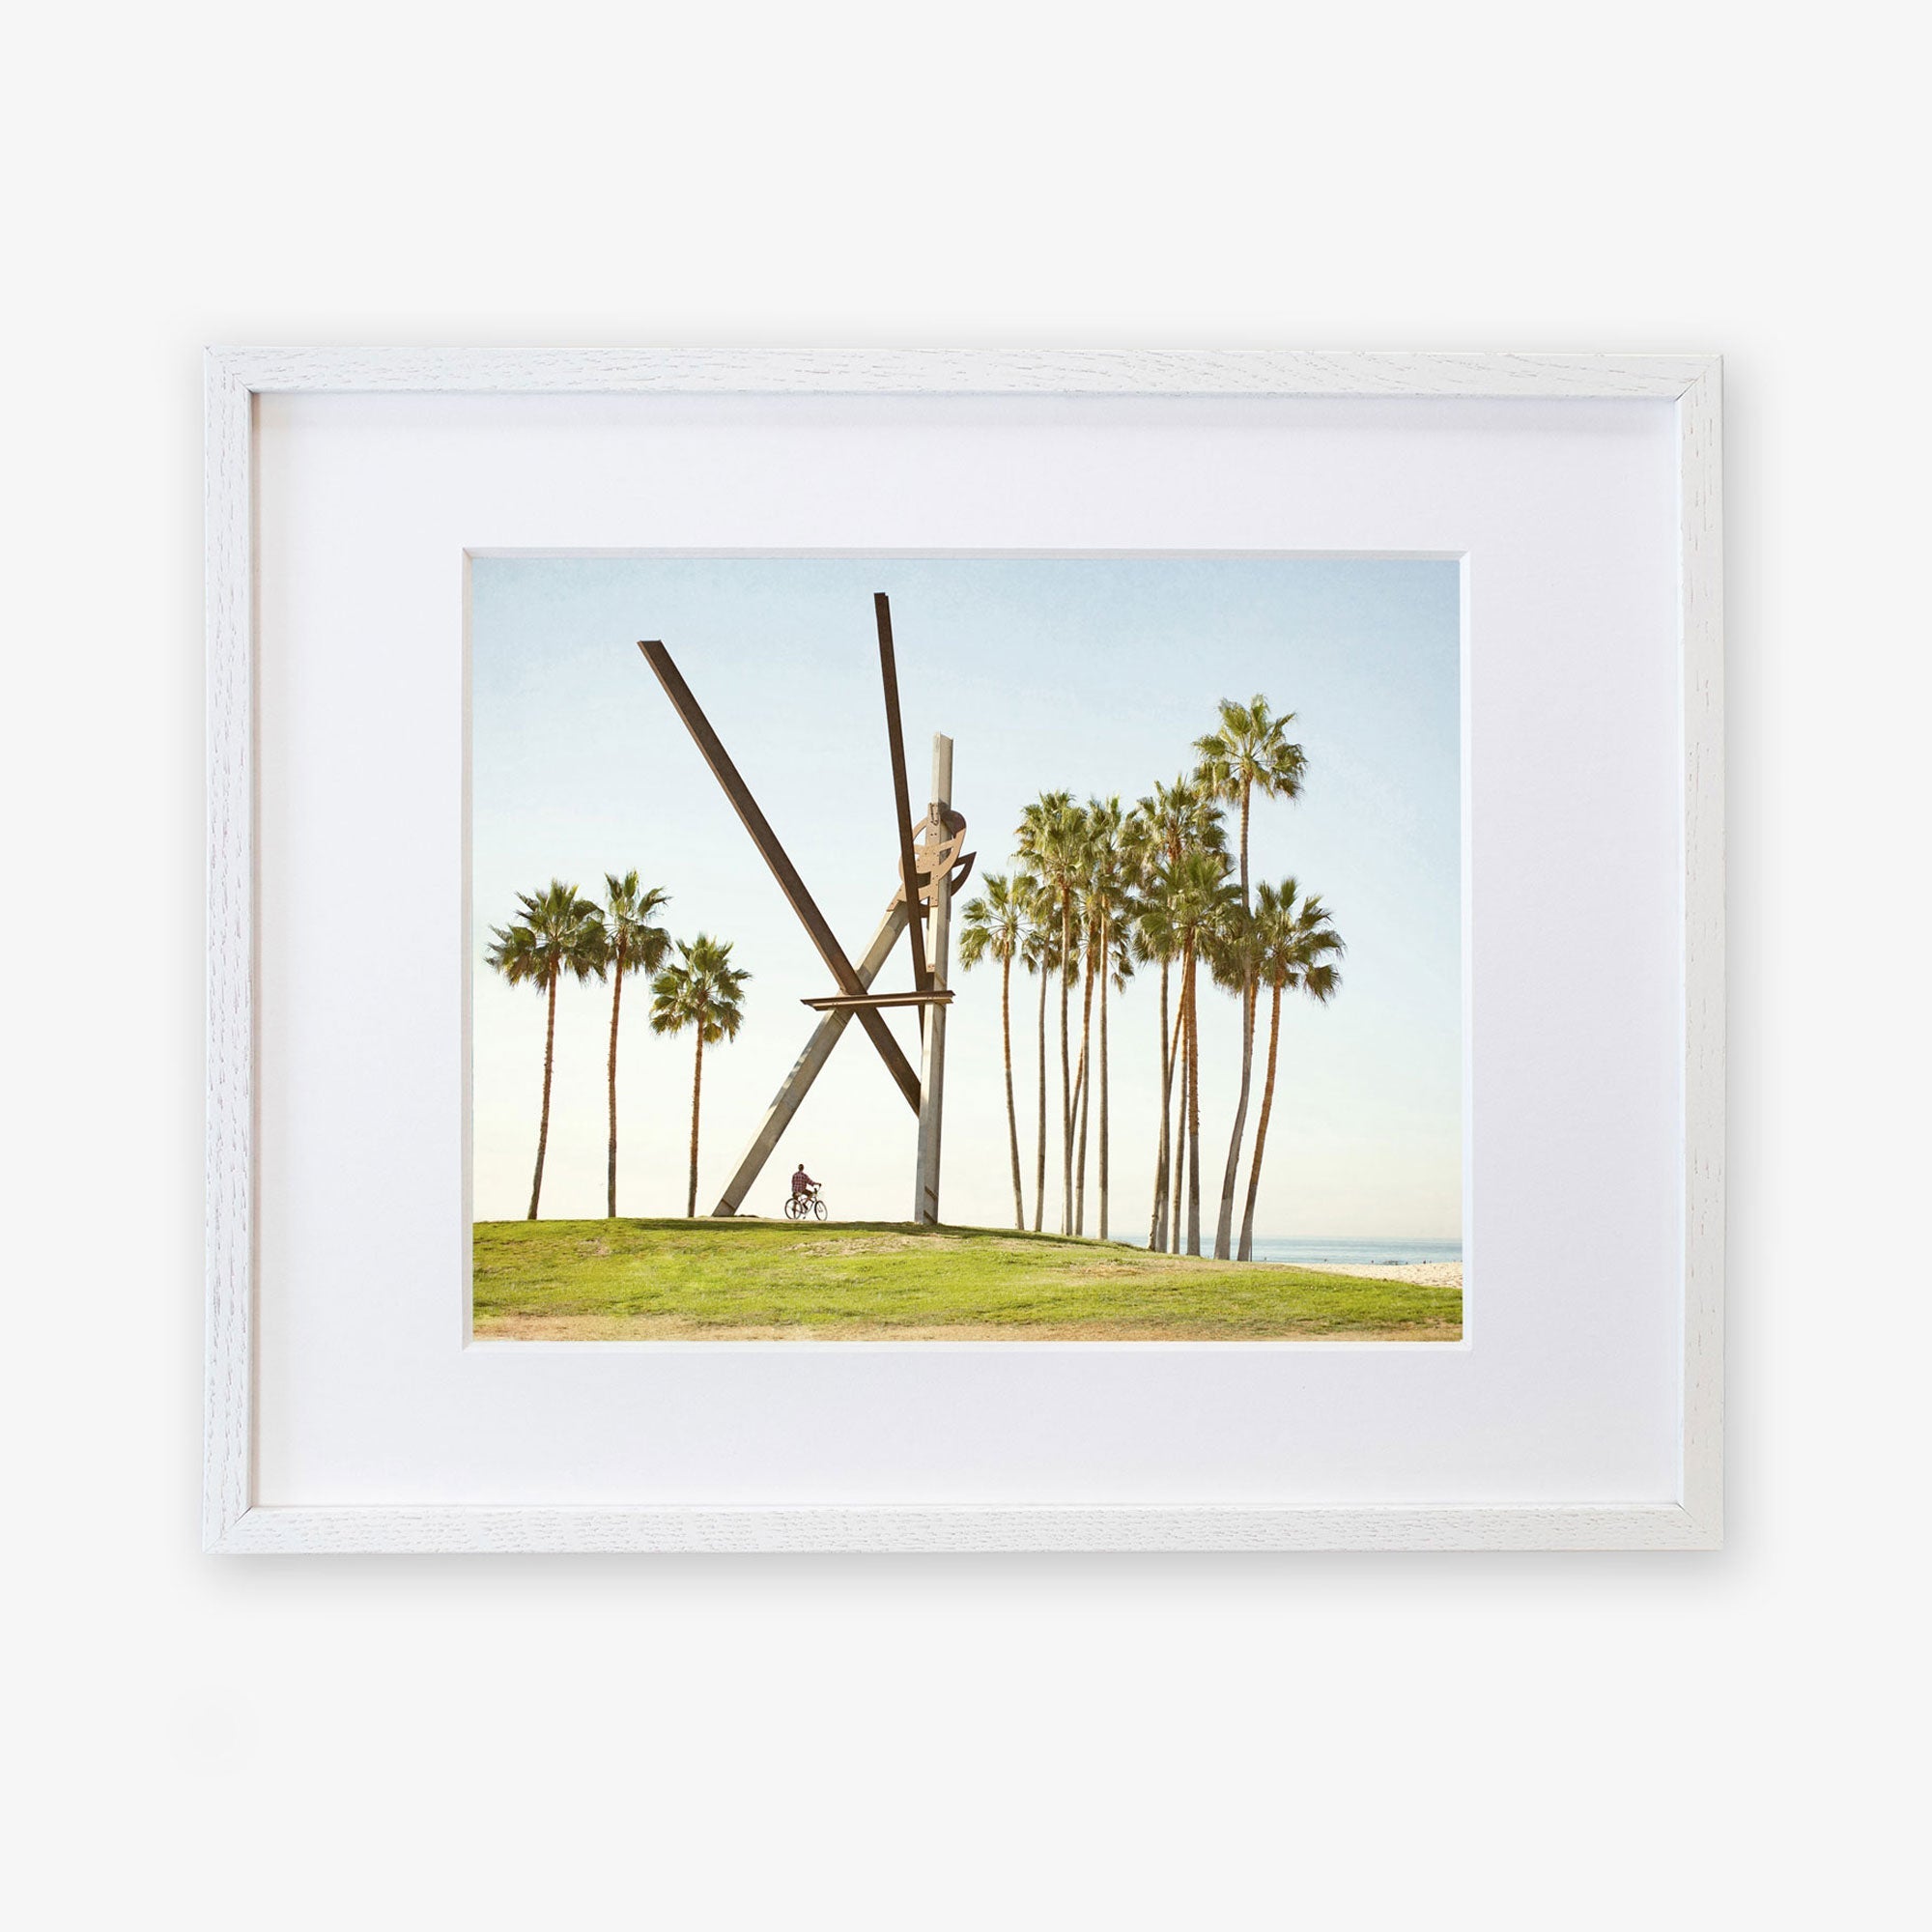 Framed artwork depicting the Venice Beach Landmark Sculpture, 'V is for Venice' by Offley Green, with large scissors cutting through the air and palm trees in the background of Venice Beach under a clear sky.